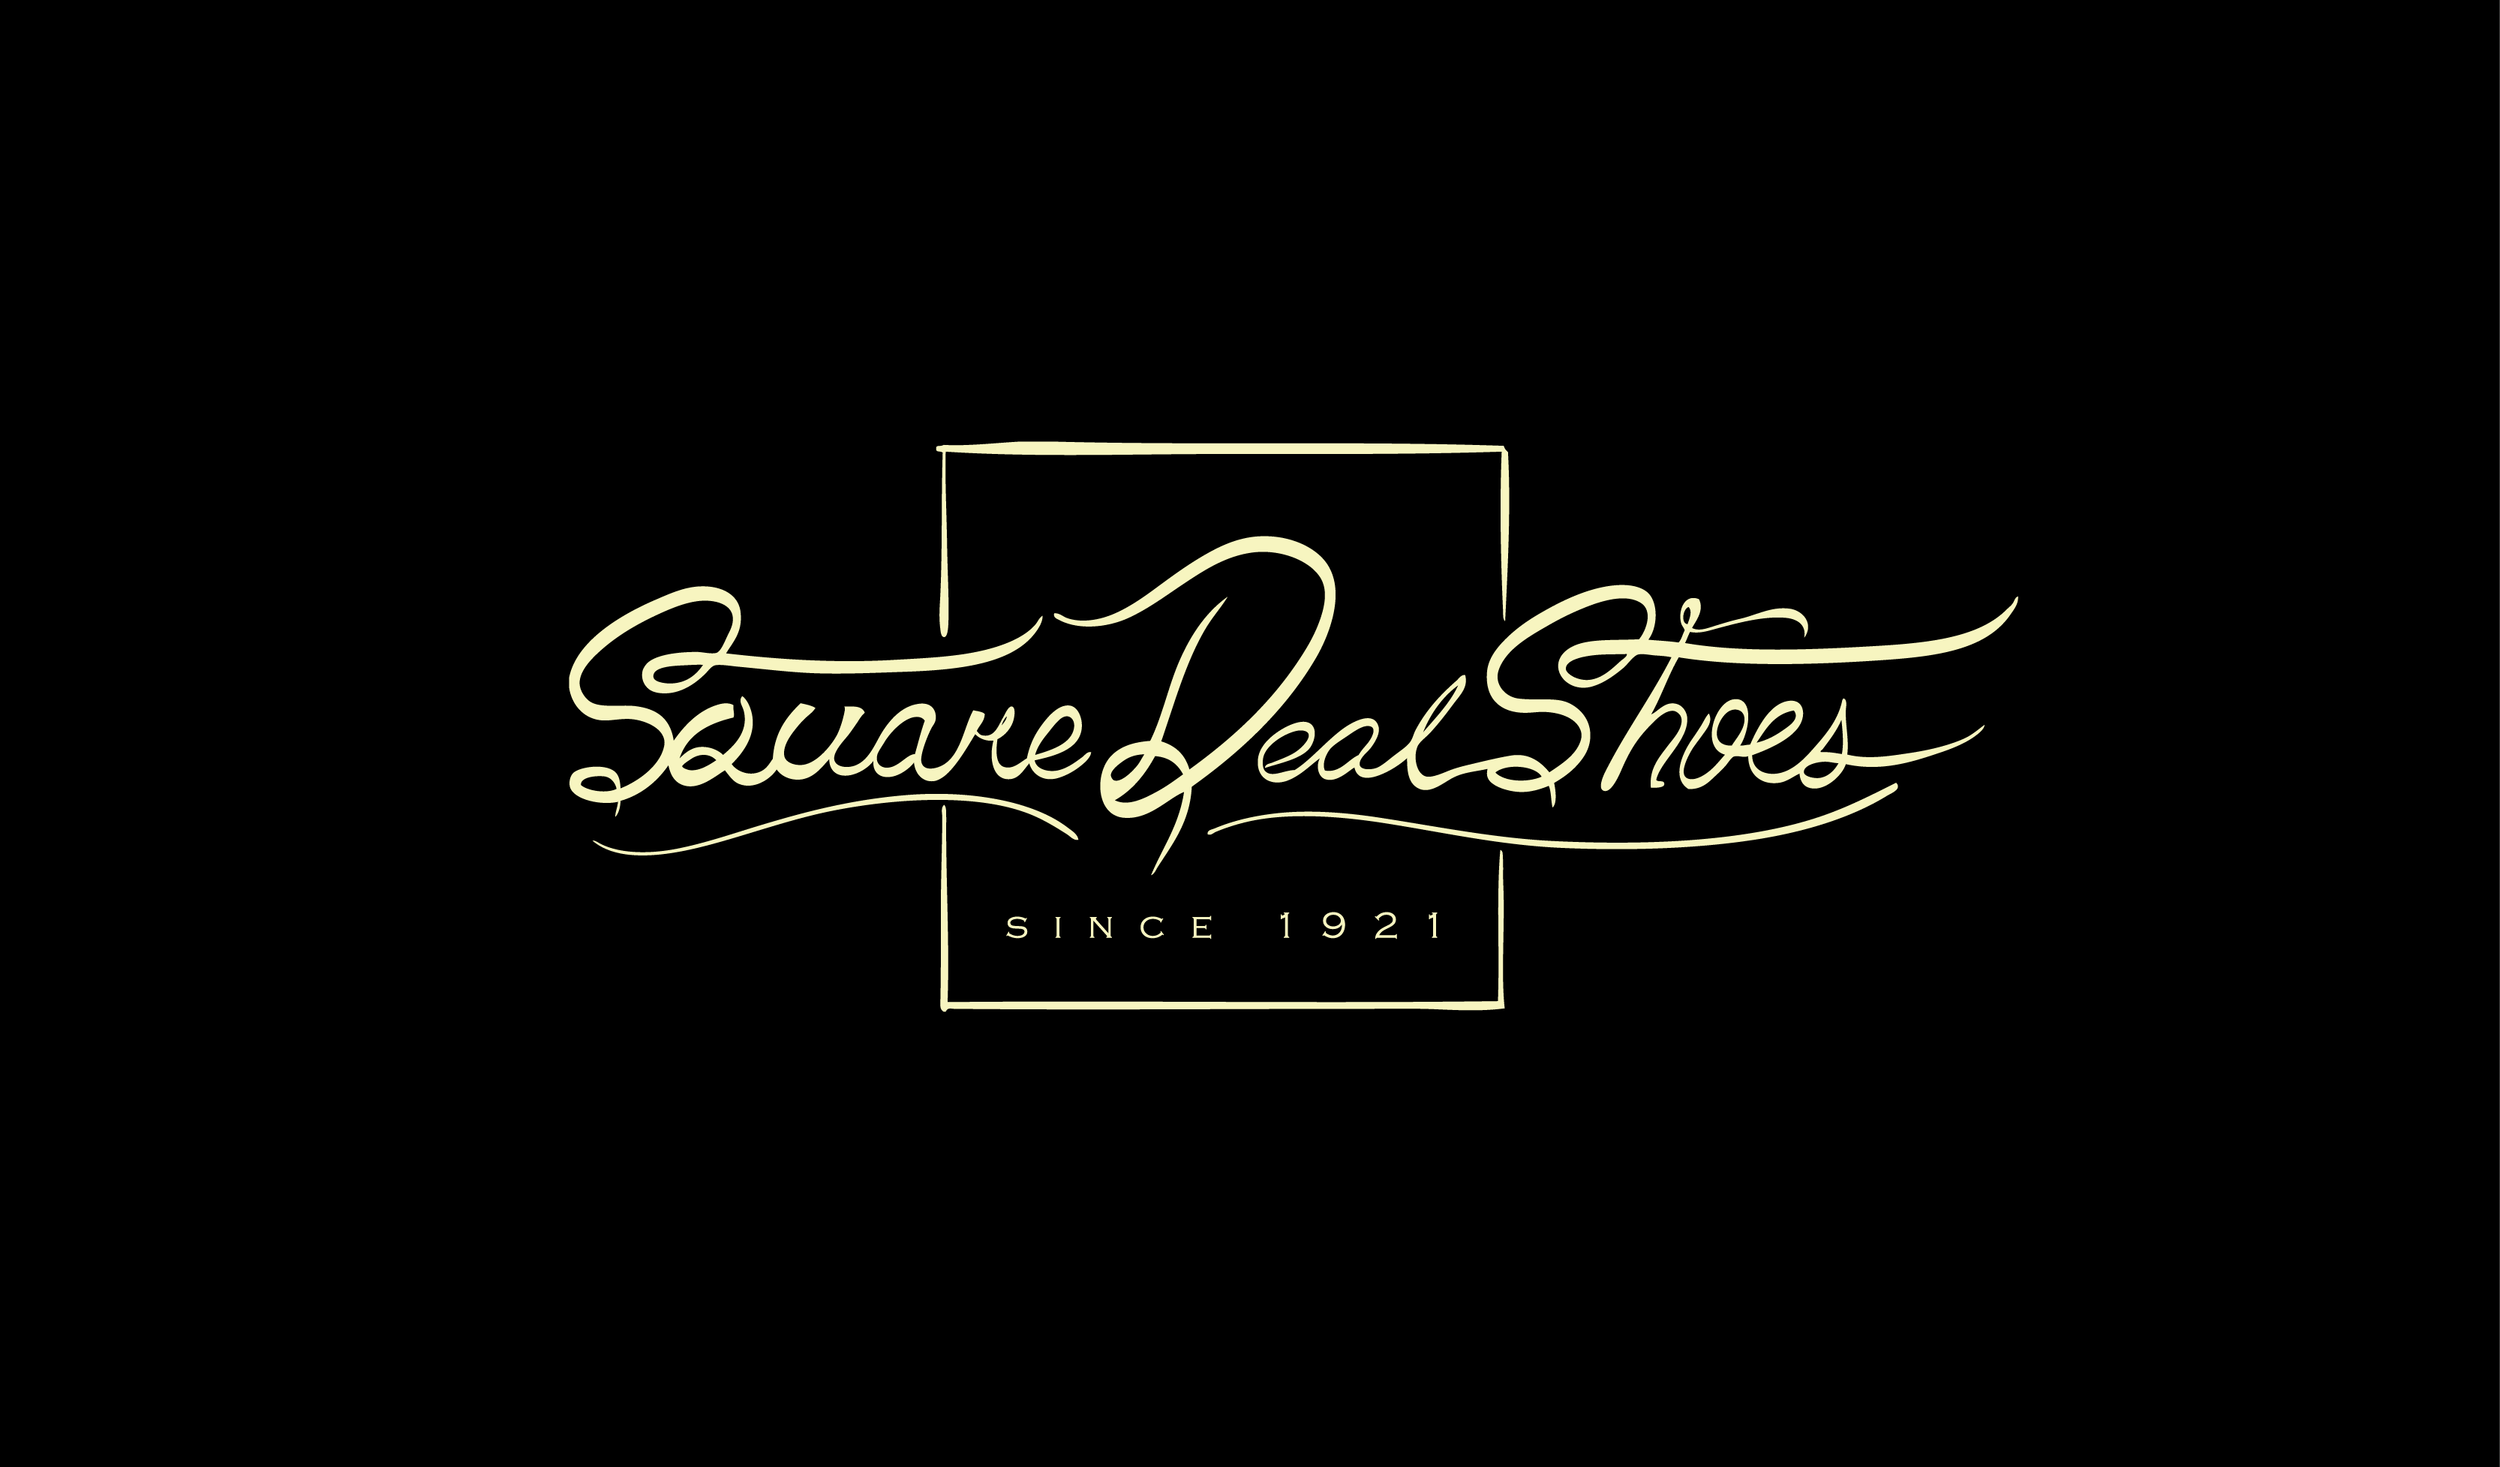 HOME — square deal shoes